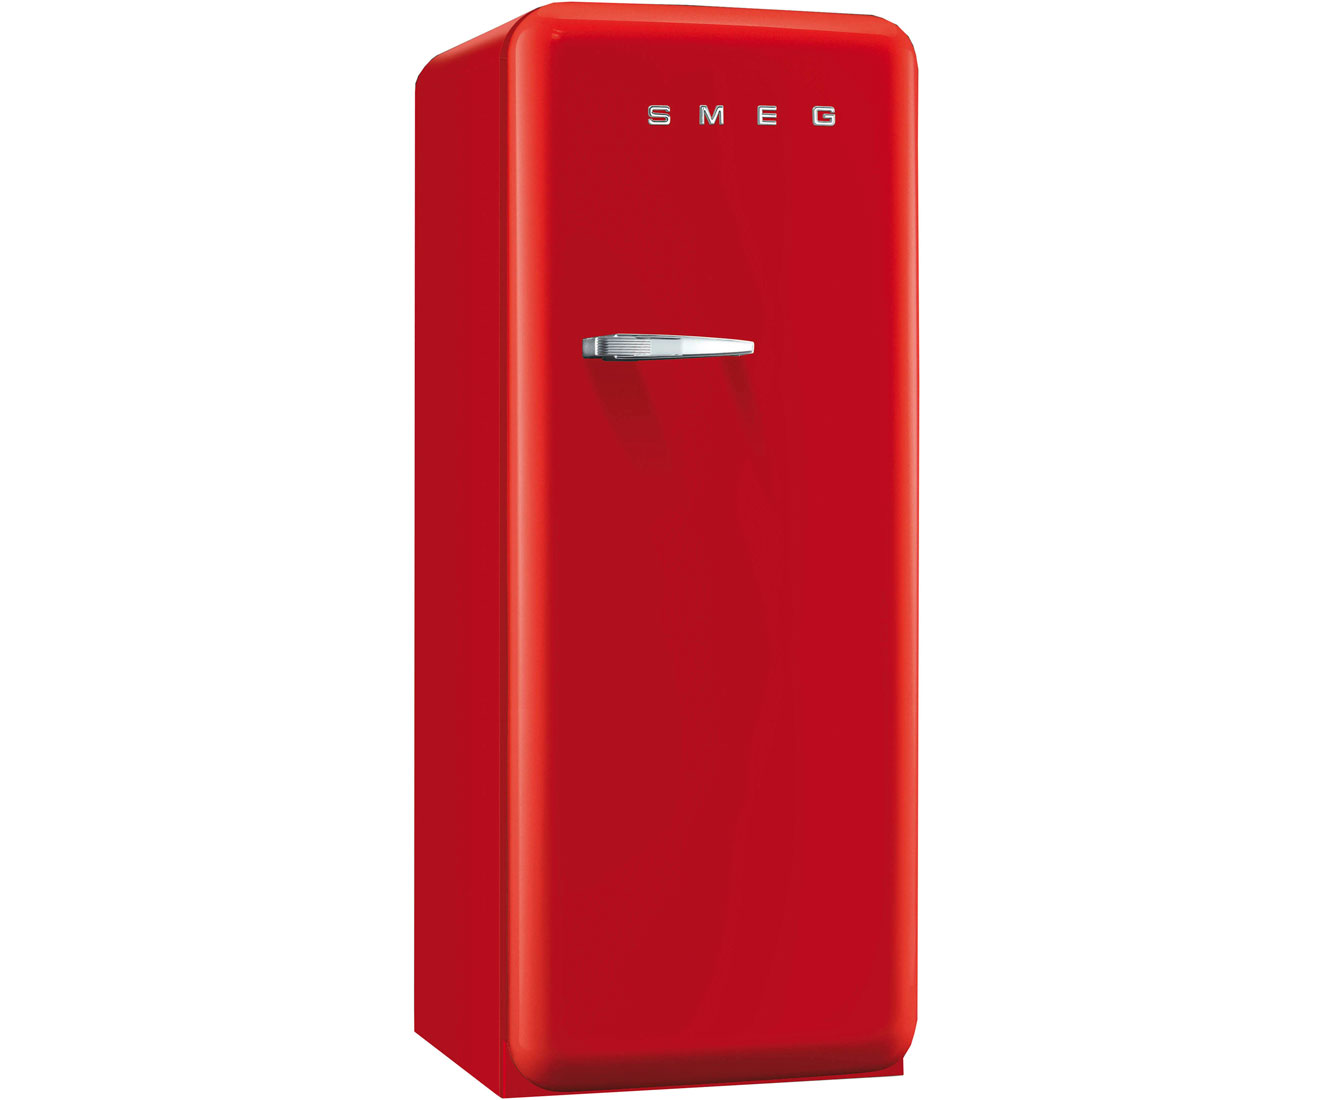 Smeg Right Hand Hinge CVB20RR1 Free Standing Freezer in Red